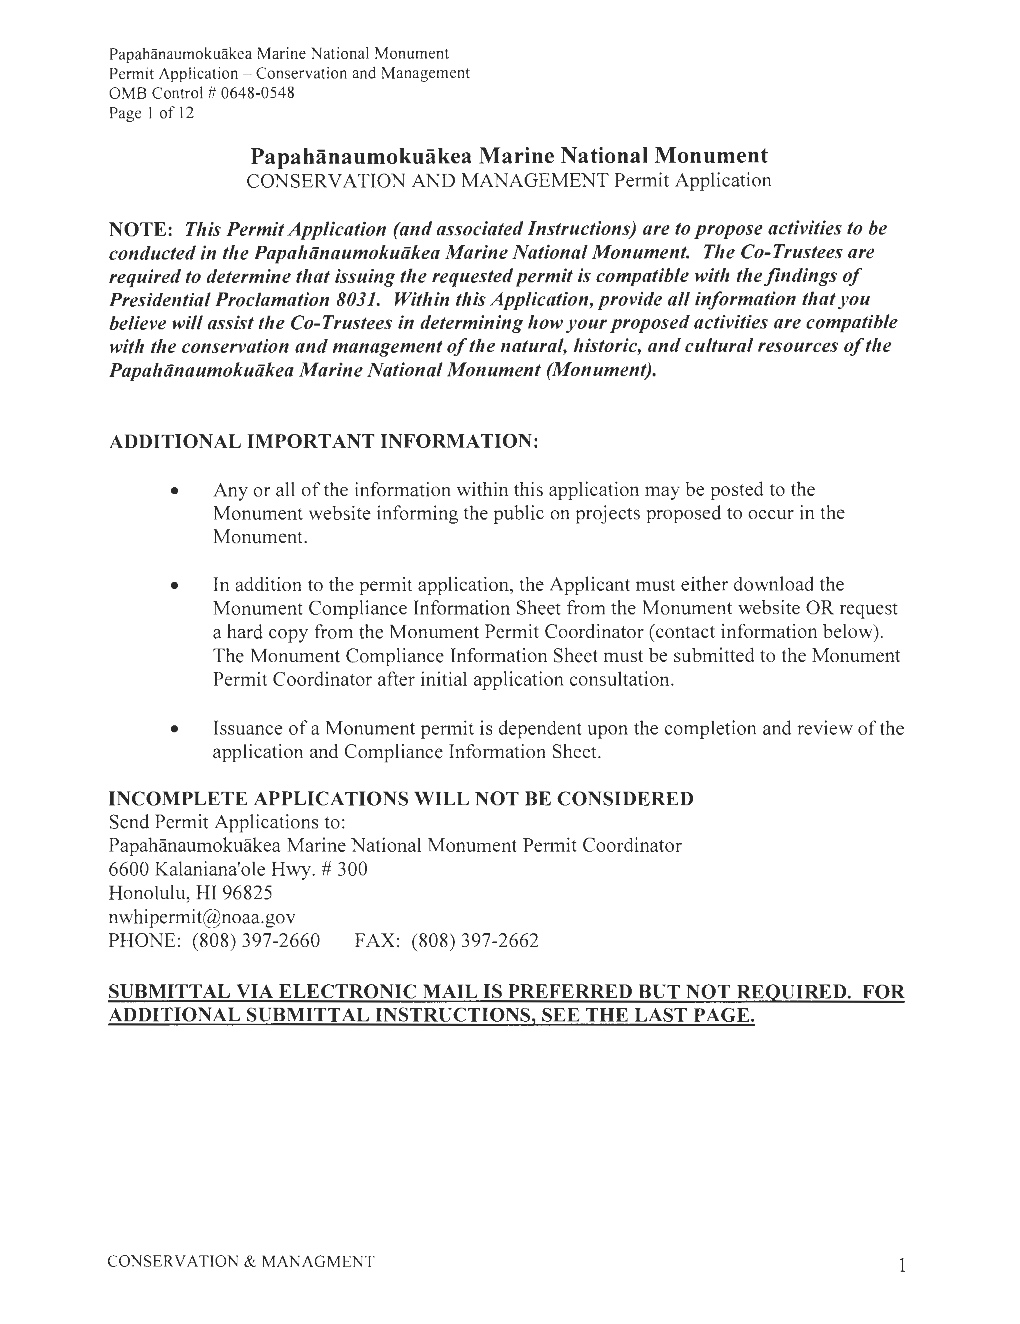 Papahanaumokuakea Marine National Monument Permit Application - Conservation and Management OMB Control # 0648-0548 Page I of 12